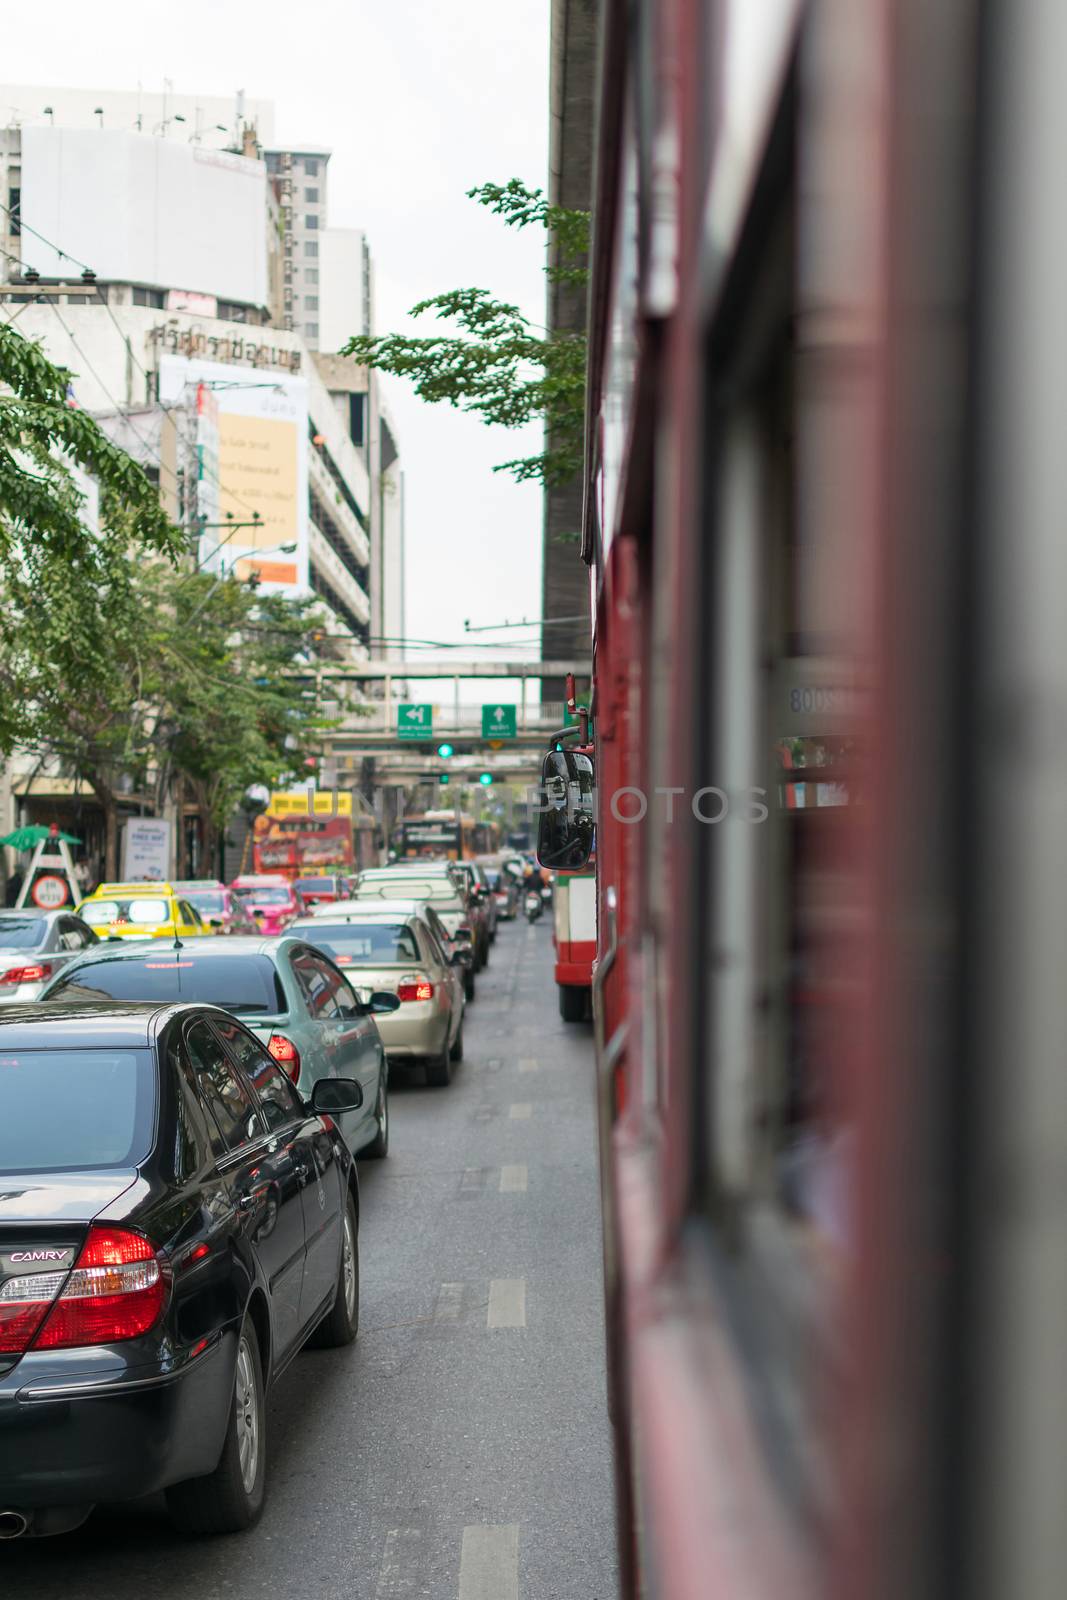 Bangkok, Thailand - January 22, 2016 : Thai buses are one of the most important public transport system in Bangkok.